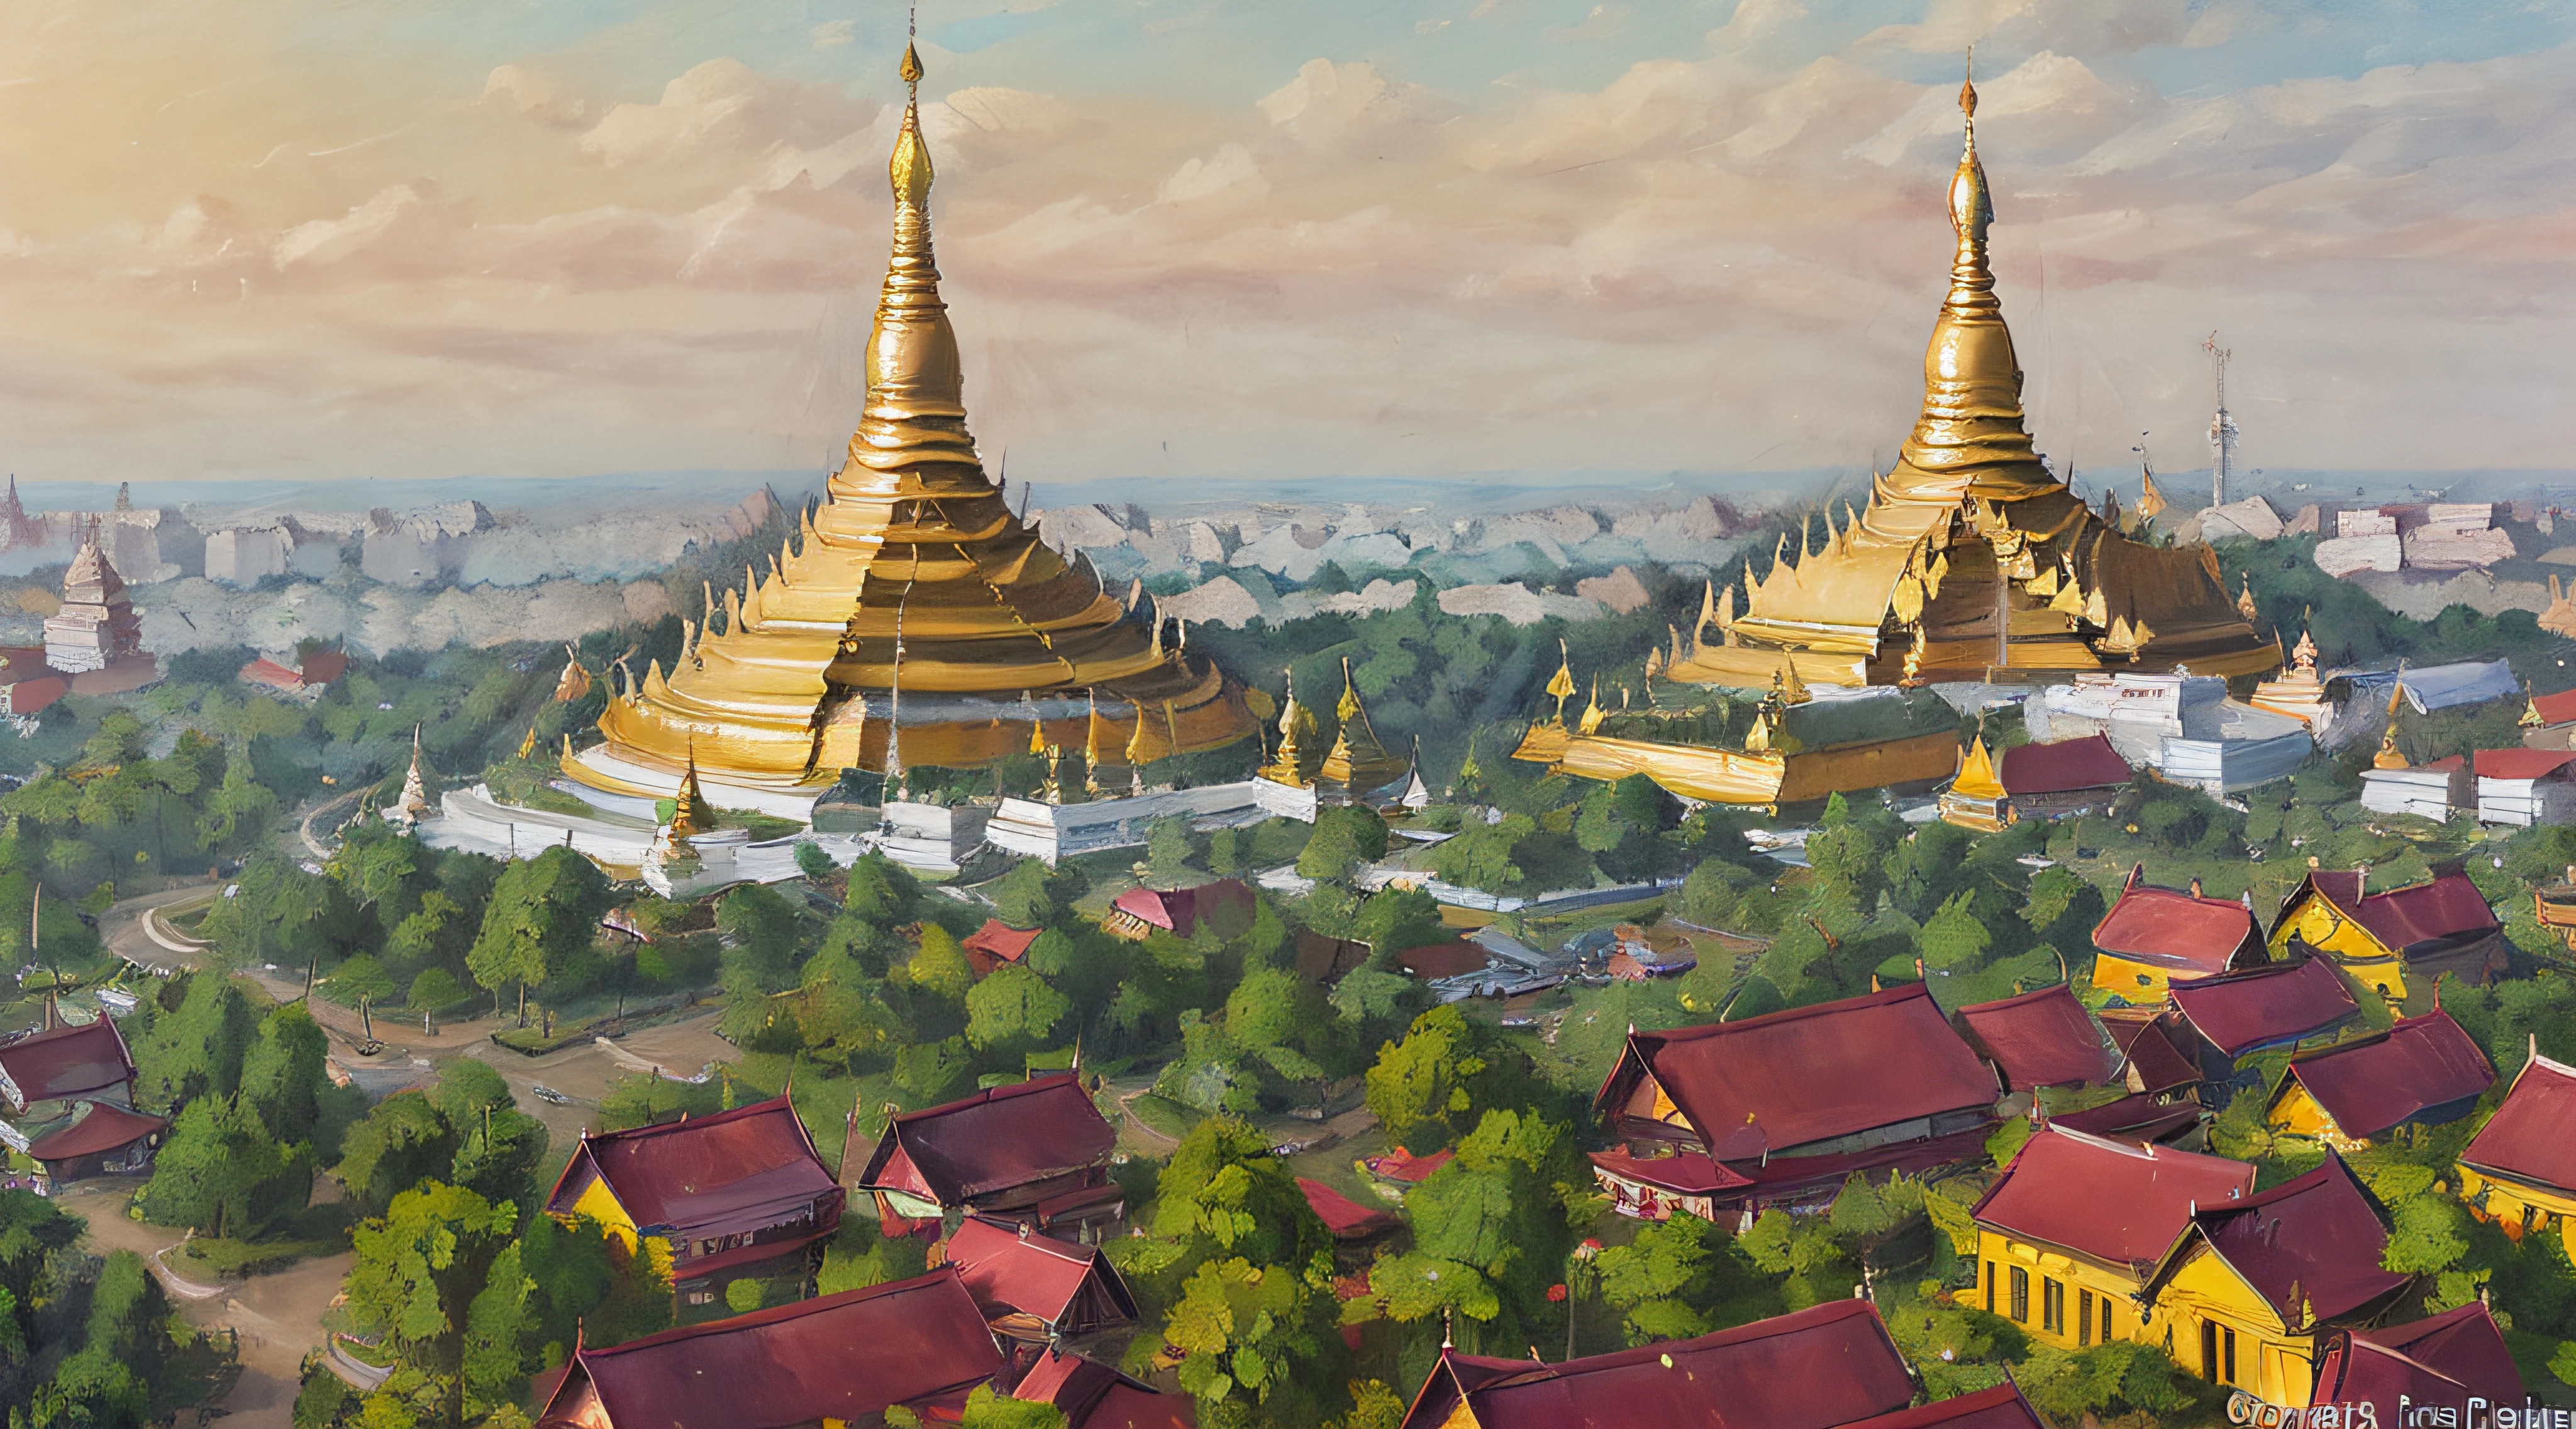 Shwedagon pagoda,(( Burma, Rangoon)), In the style of oil painting,  Concept  art, old buildings, down town,70's style, masterpiece art work, in the style of Norman Rockwell.